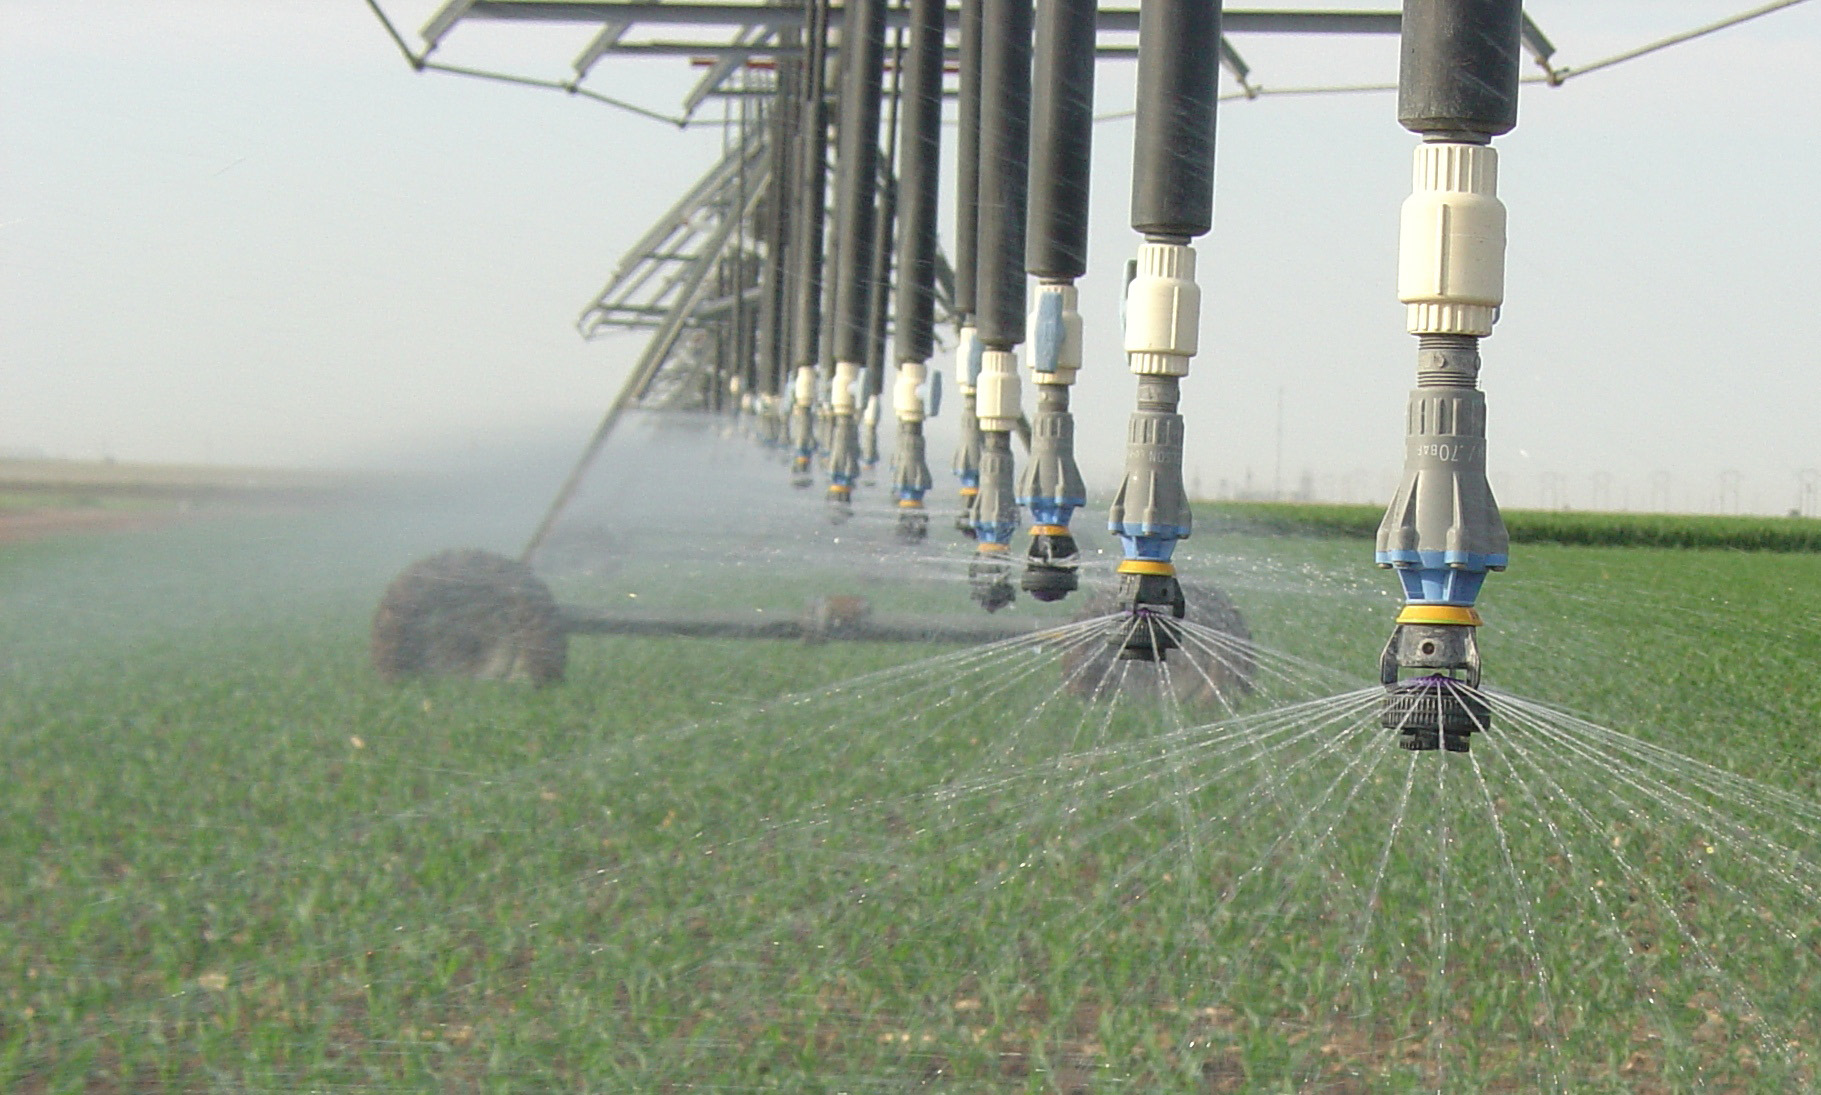 Increasing nitrate concentrations in the Rolling Plains need continued monitoring and accounting for when irrigating, according to two Texas AgriLife Research scientists. (Texas AgriLife Research photo by Kay Ledbetter)